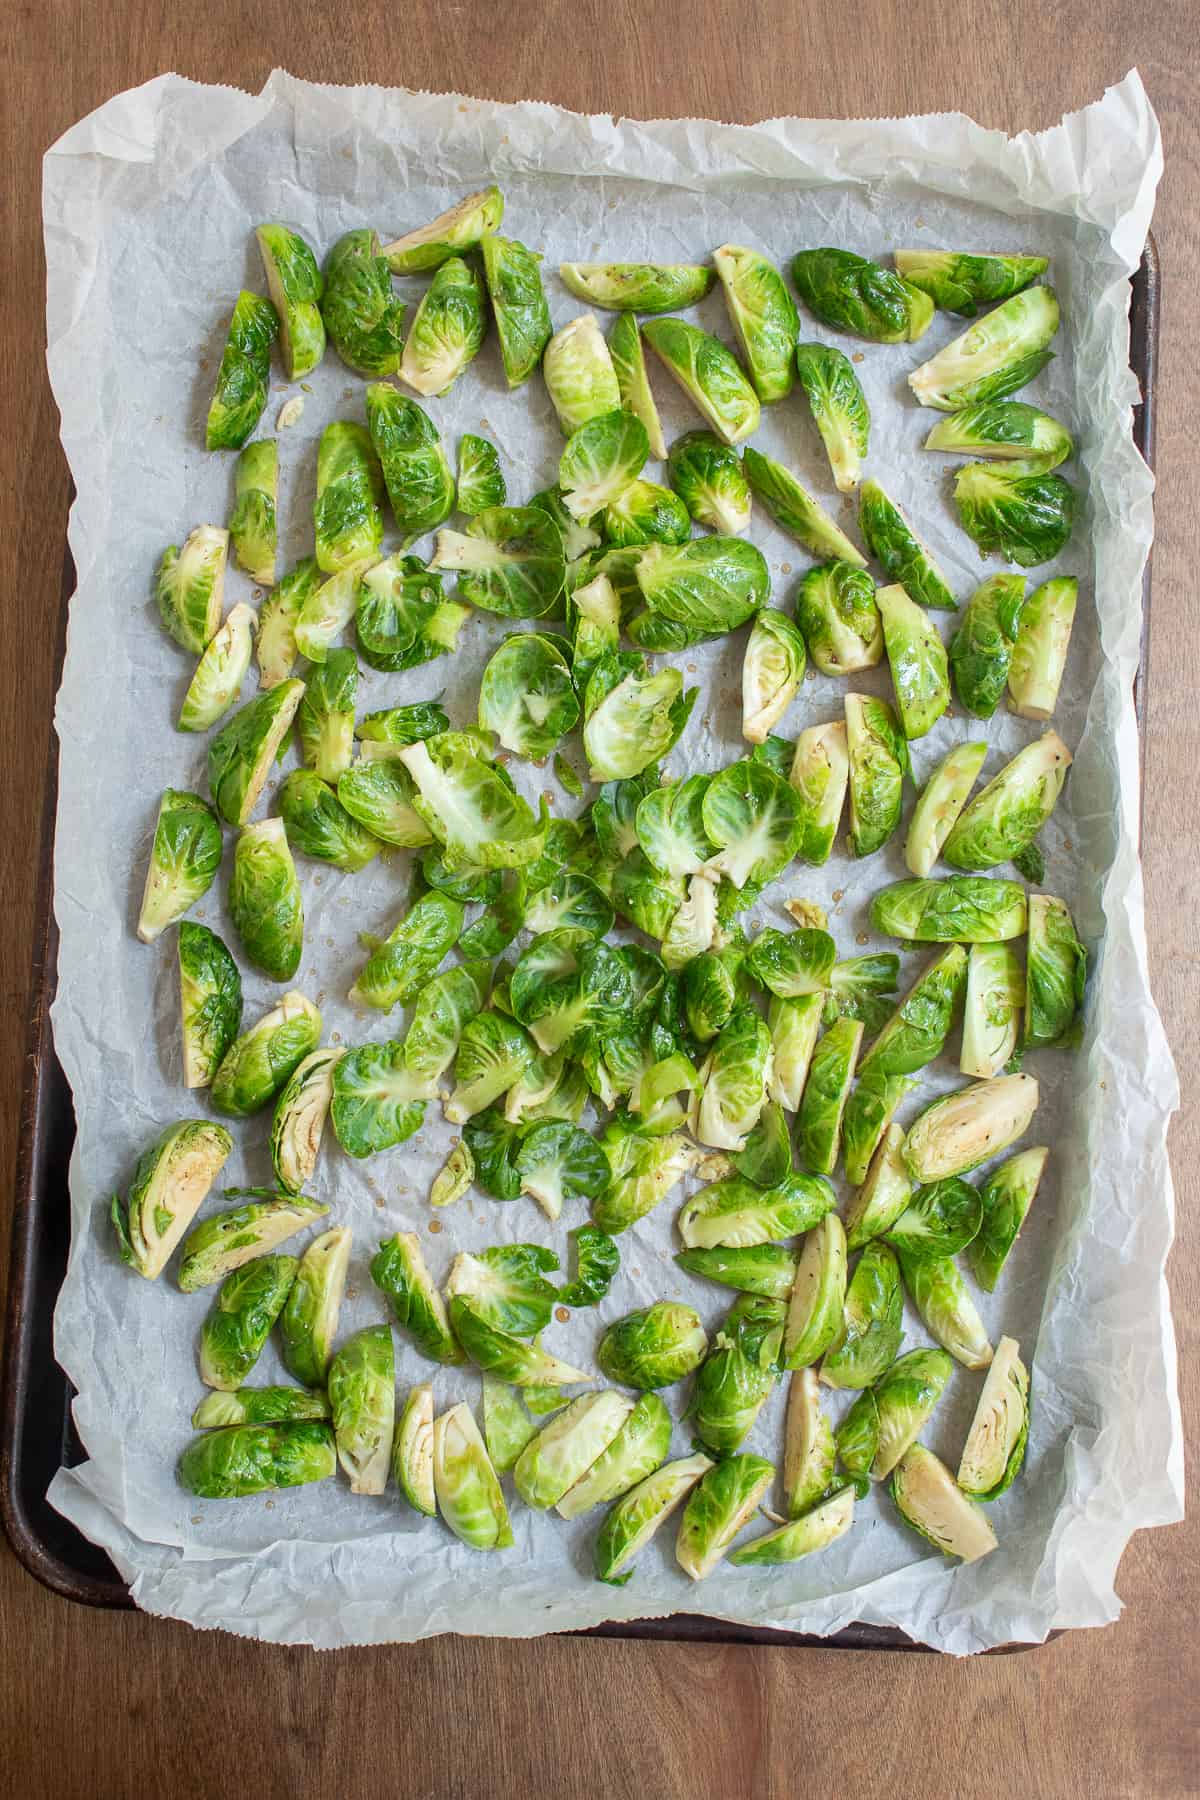 Brussel sprouts scattered over a parchment-lined sheet pan after tossing with the glaze.